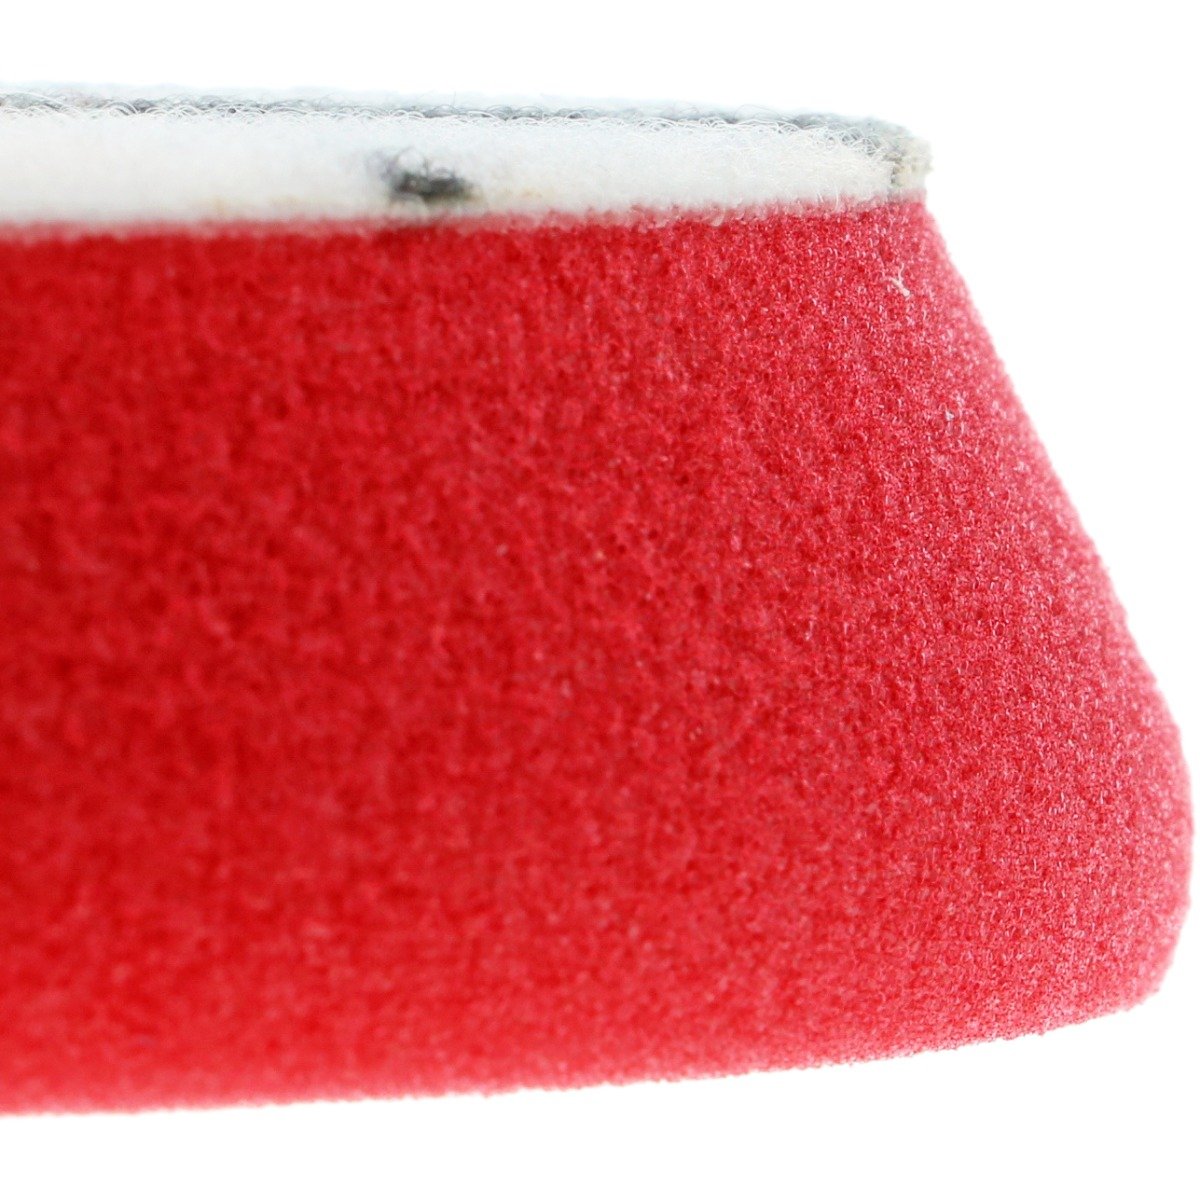 Uro-Cell Red Finishing Foam Pad - 7 inch